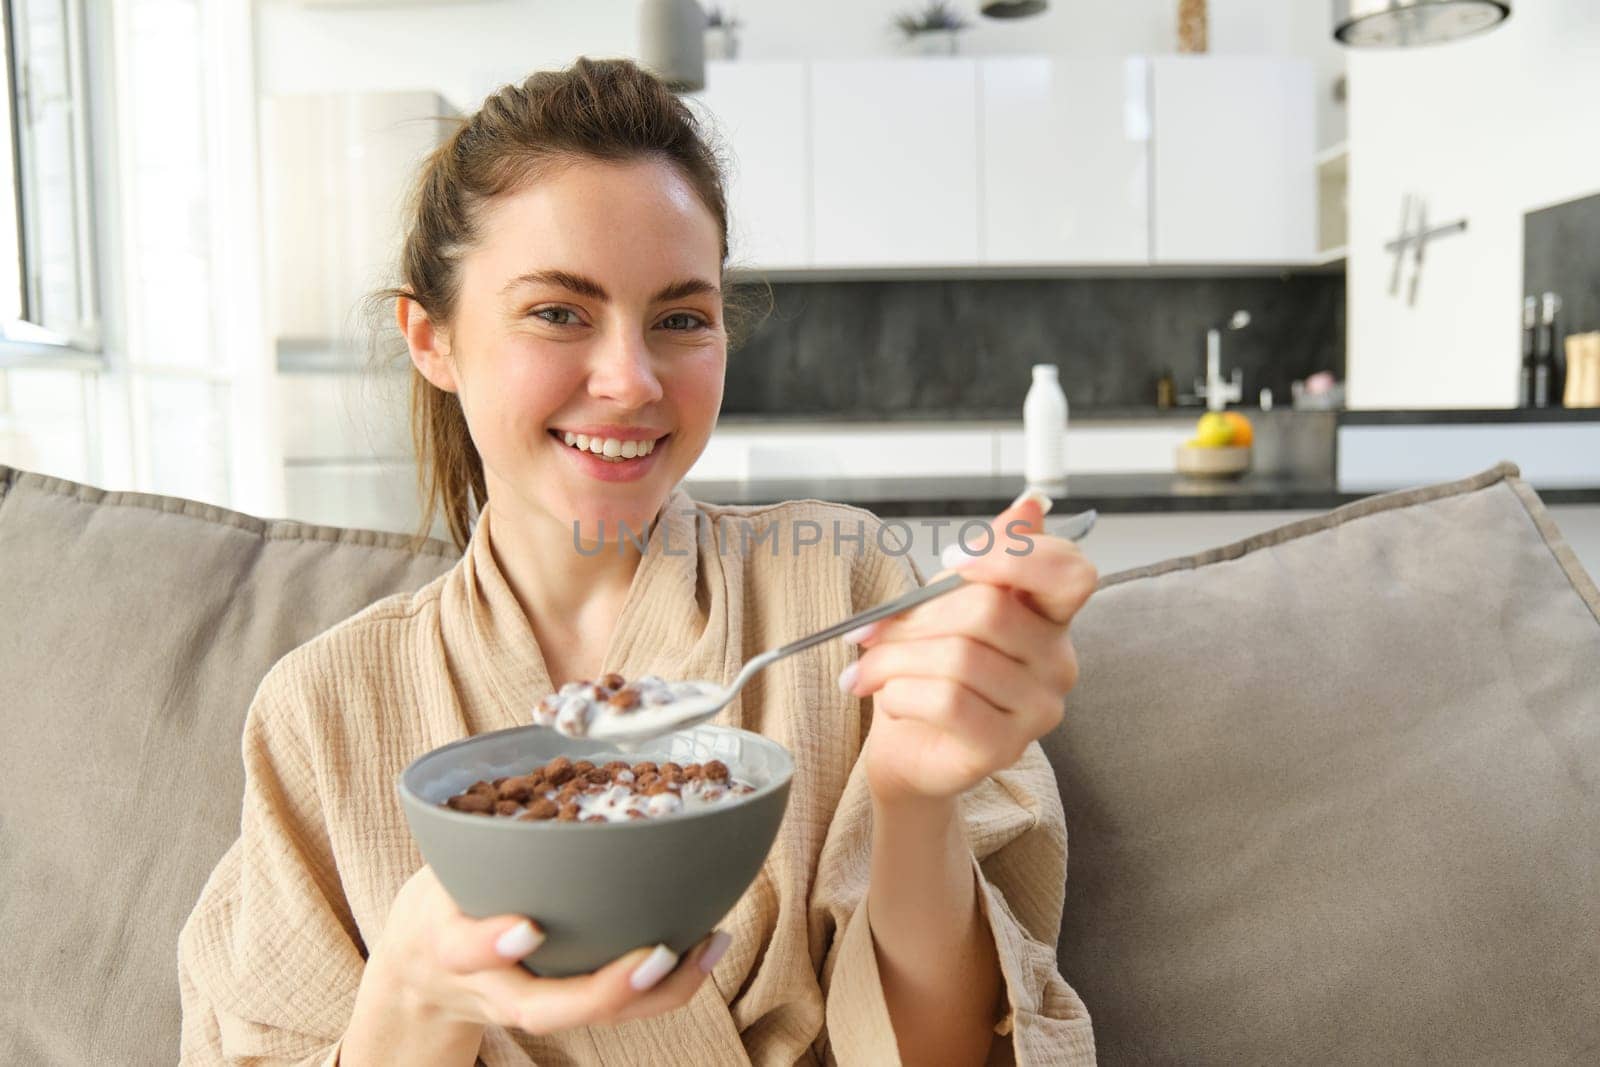 Relaxing morning at home. Young beautiful woman in bathrobe, eating cereals on sofa, having her breakfast in living room.